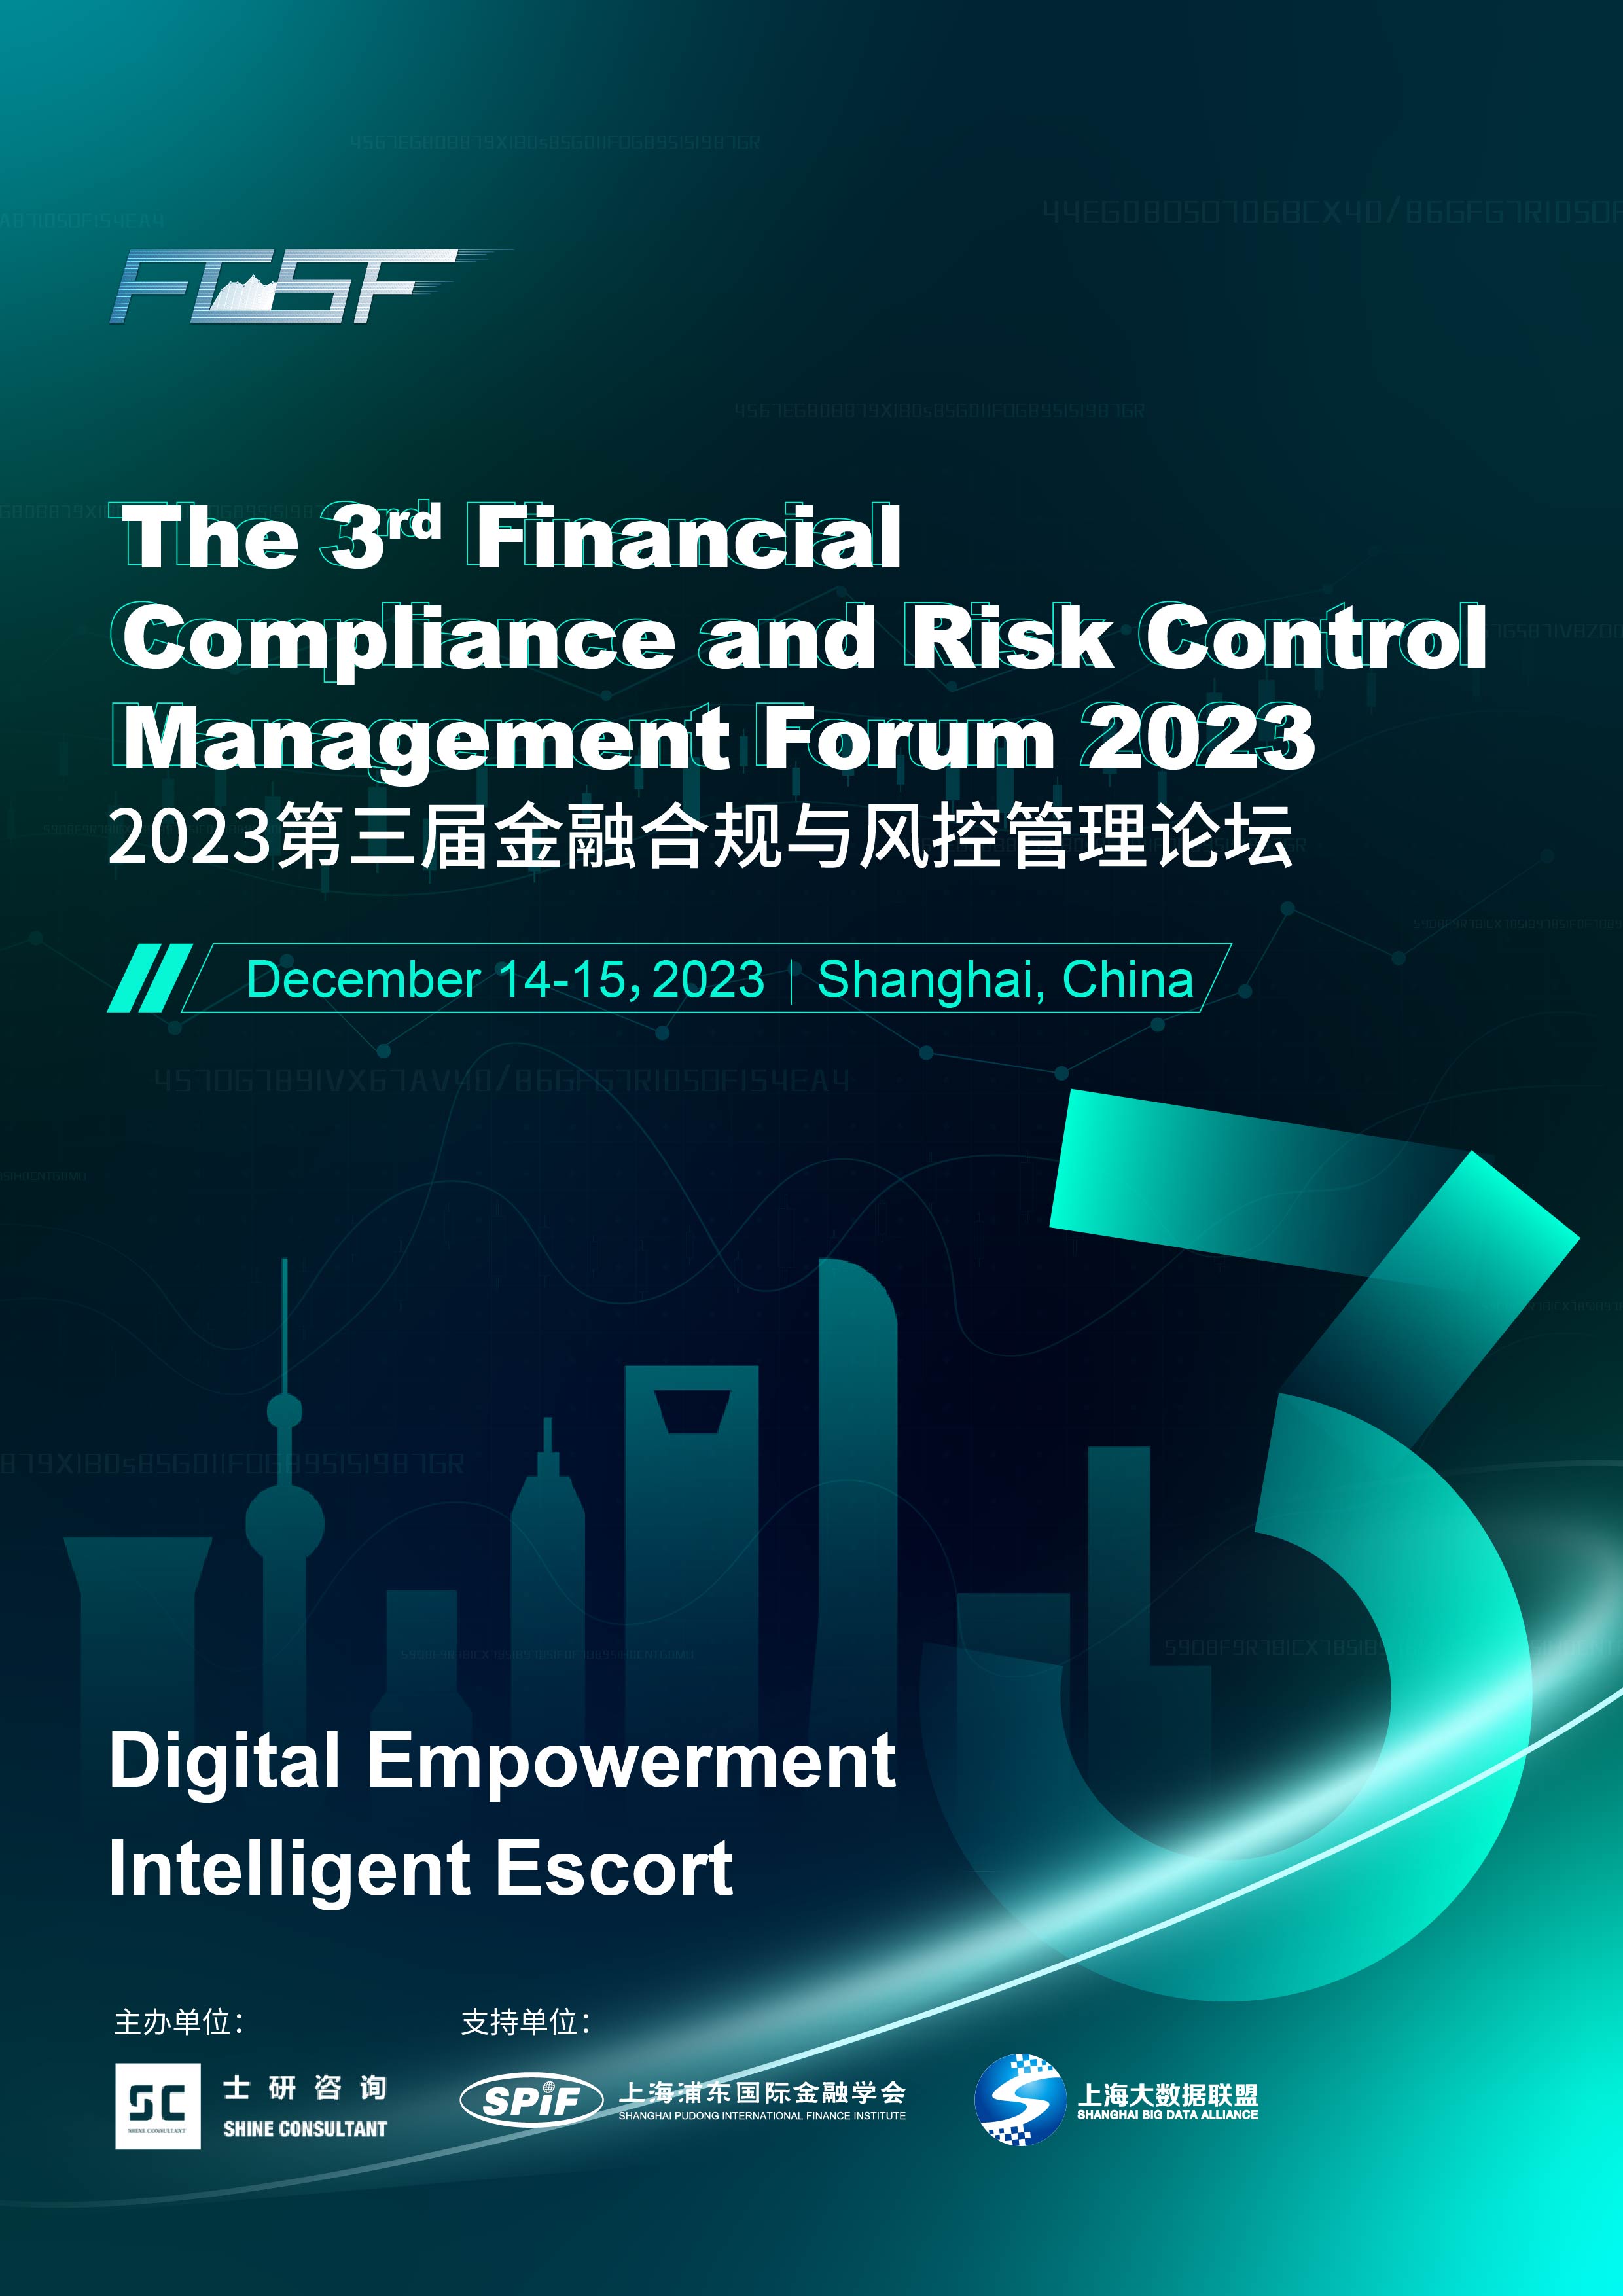 The 3rd Financial Compliance and Risk Control Management Forum